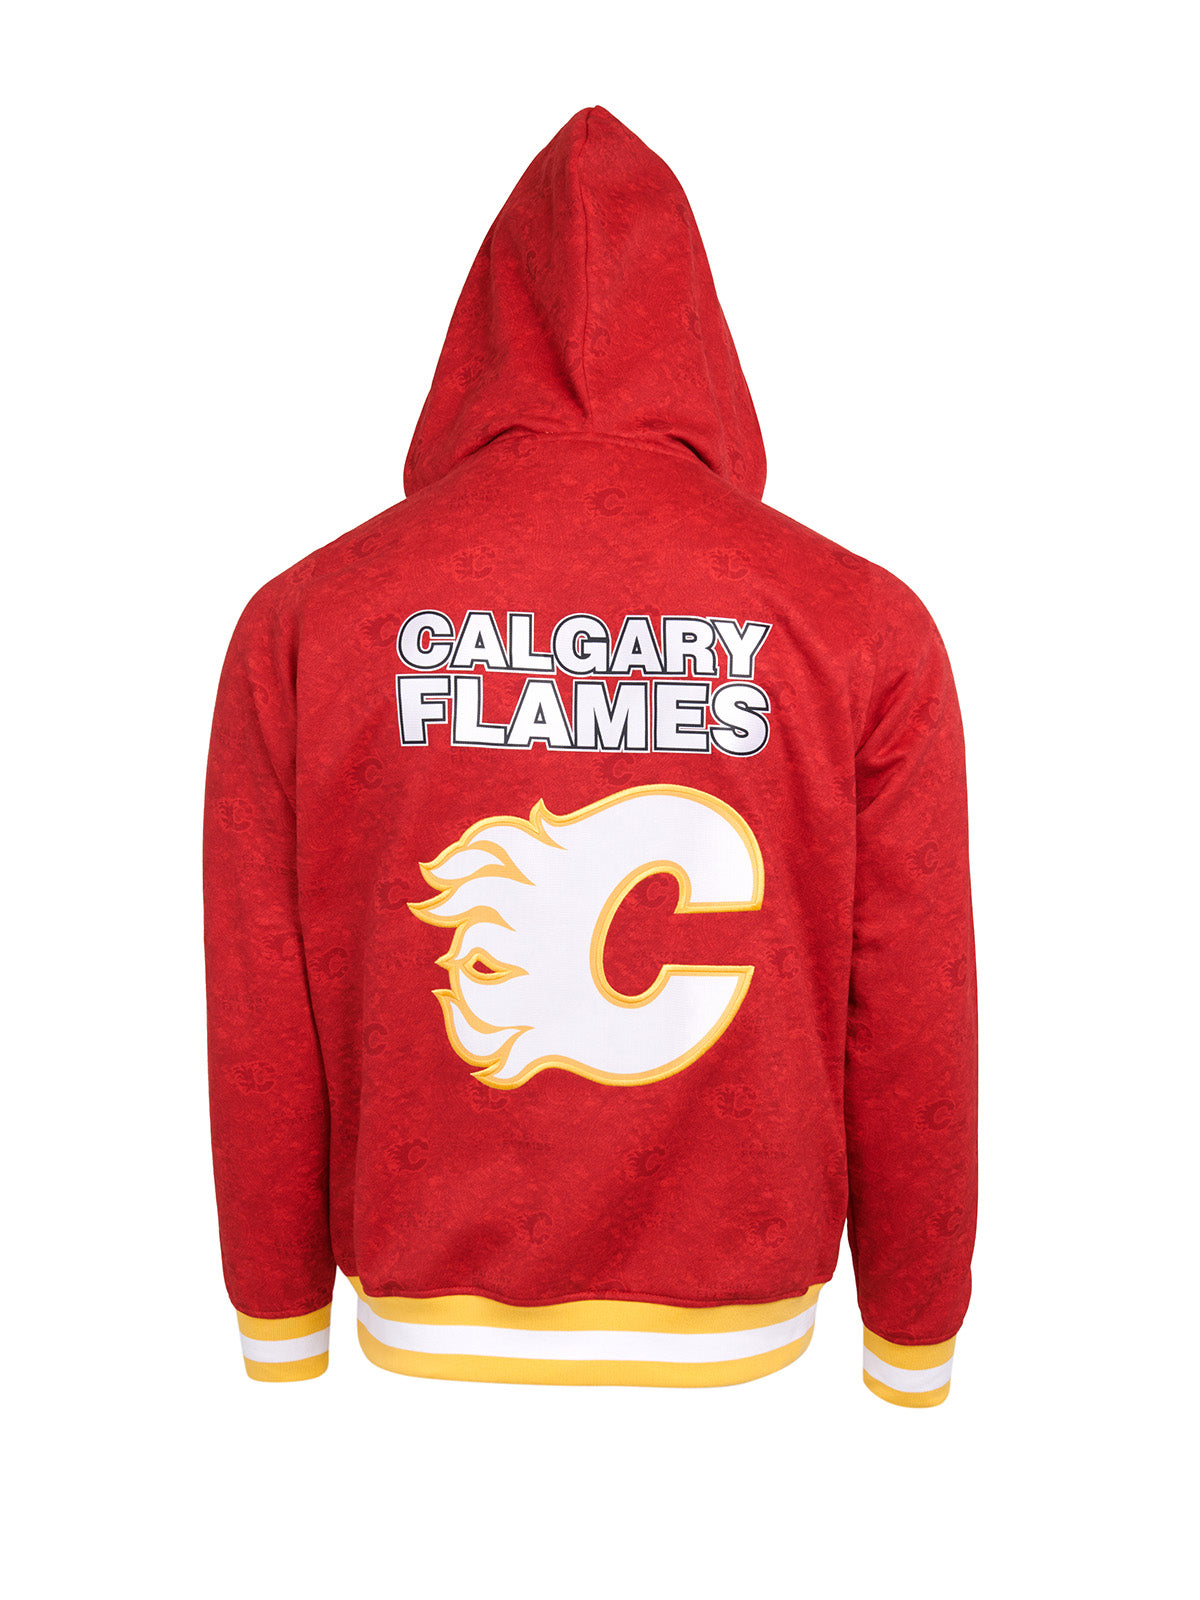 Calgary Flames Hoodie - Show your team spirit, with the iconic team logo patch on the back, and proudly display your Calgary Flames support in their team colors with this NHL hockey hoodie.